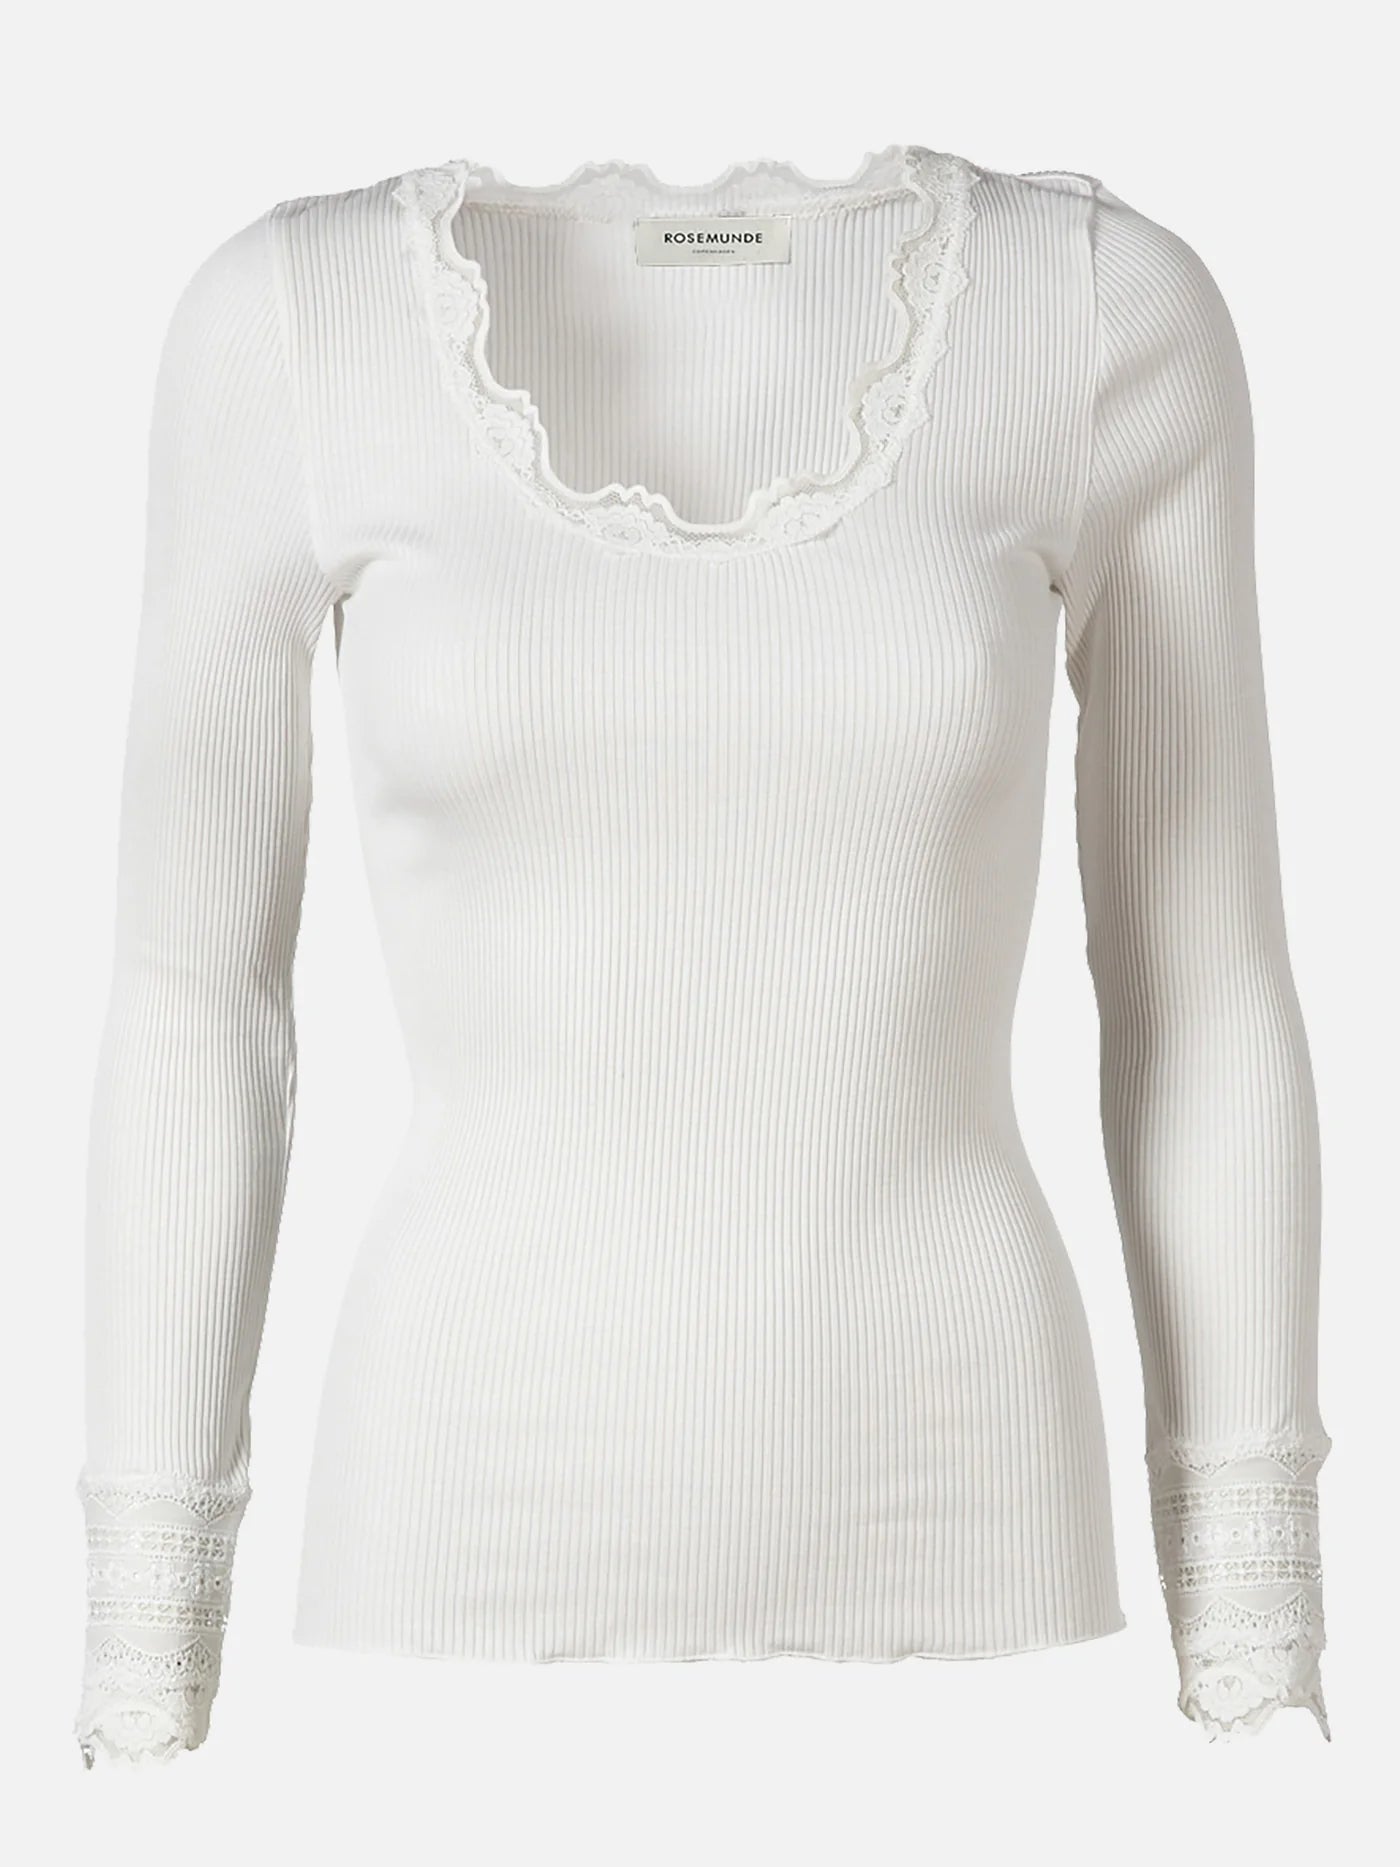 A slim-fitting Long-Sleeve Silk Lace Top with lace trim by Rosemunde.